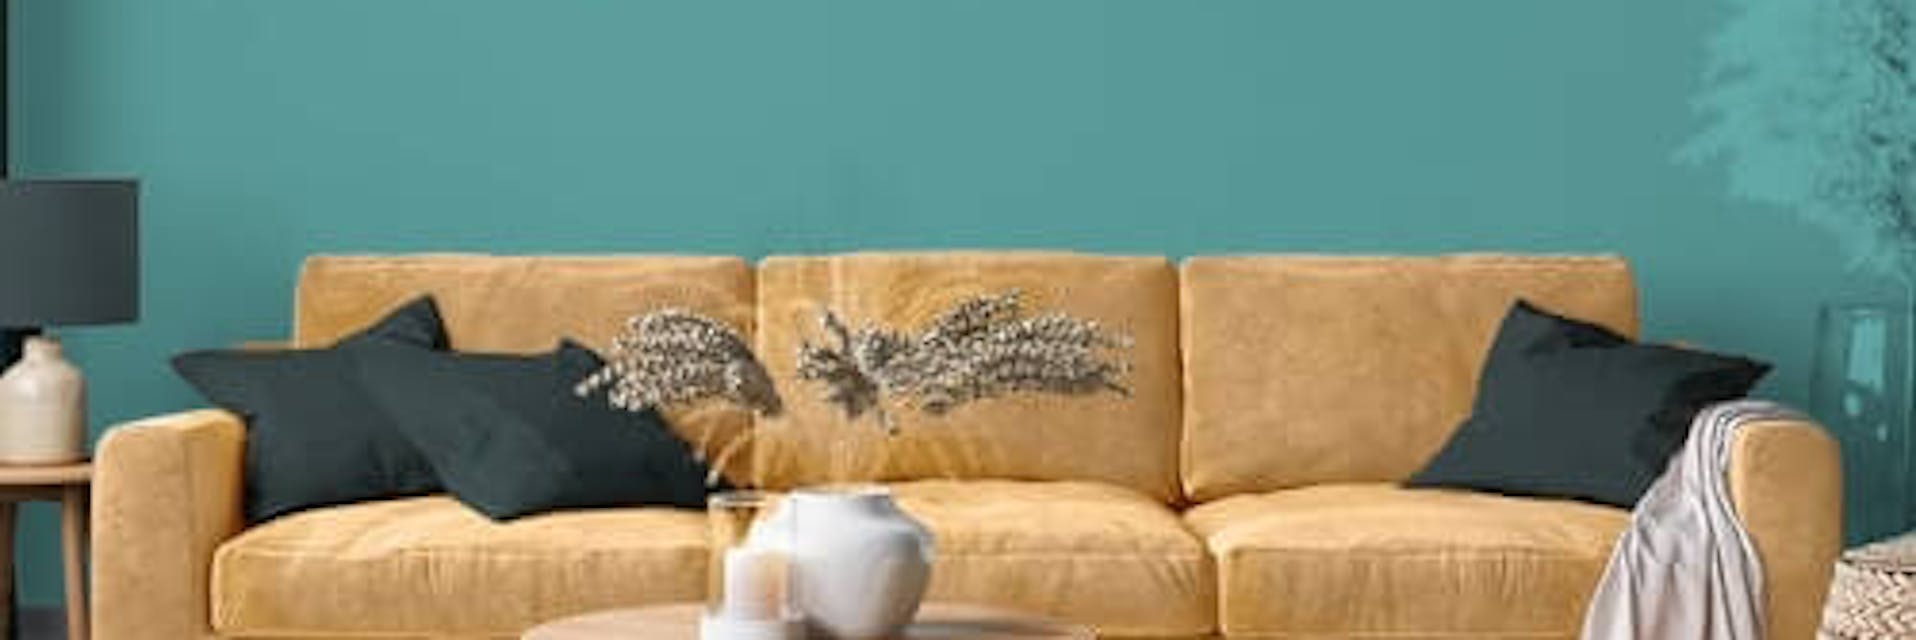 Living room painted with a aqua blue paint colour